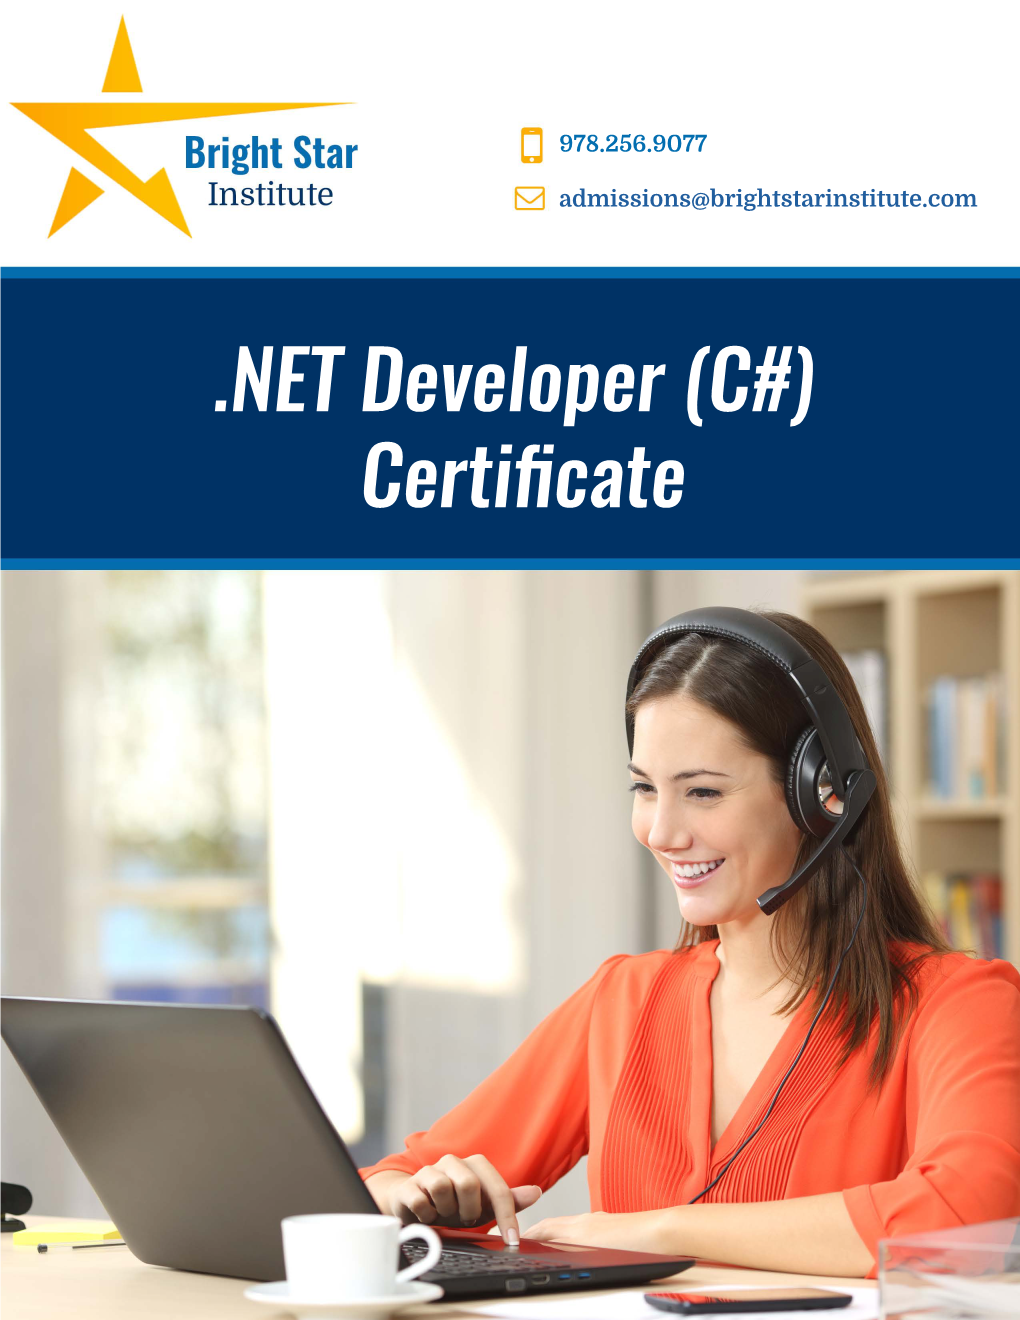 NET Developer (C#) Certificate Online, Self-Paced Training That Is Focused on Giving You the Skills Needed to Stand Out